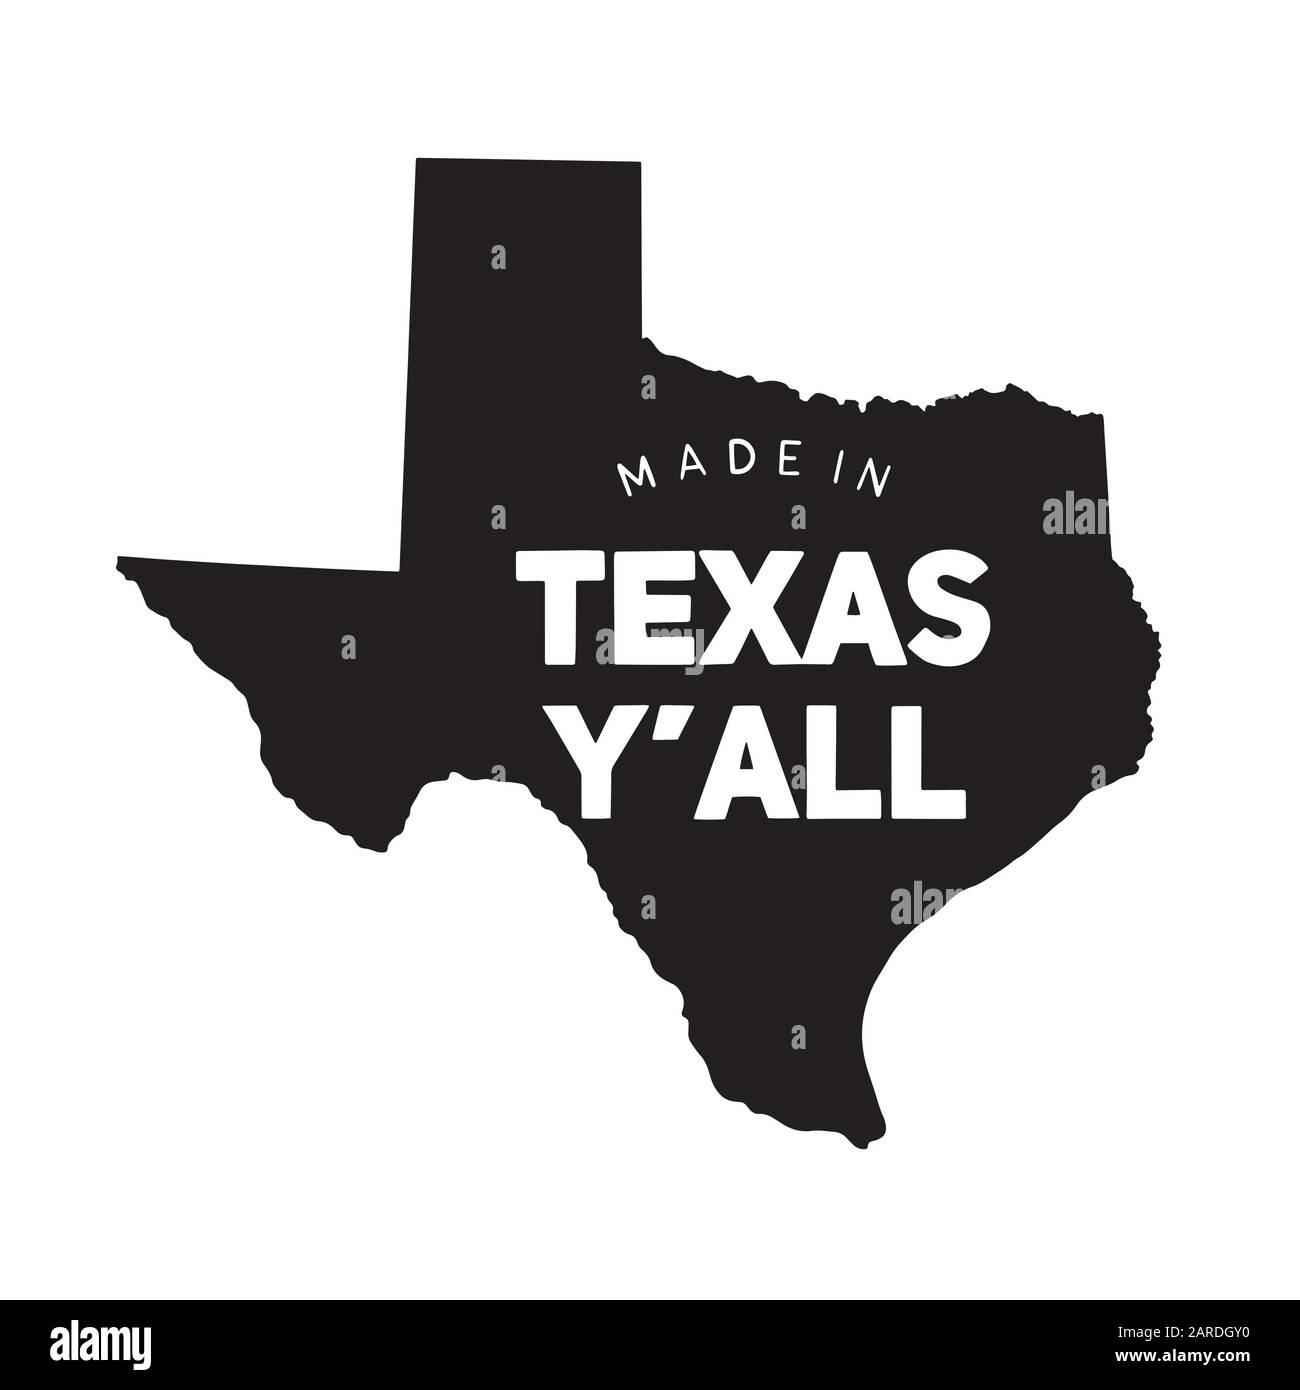 Made in texas y'all vector graphic on black Texas map Stock Vector